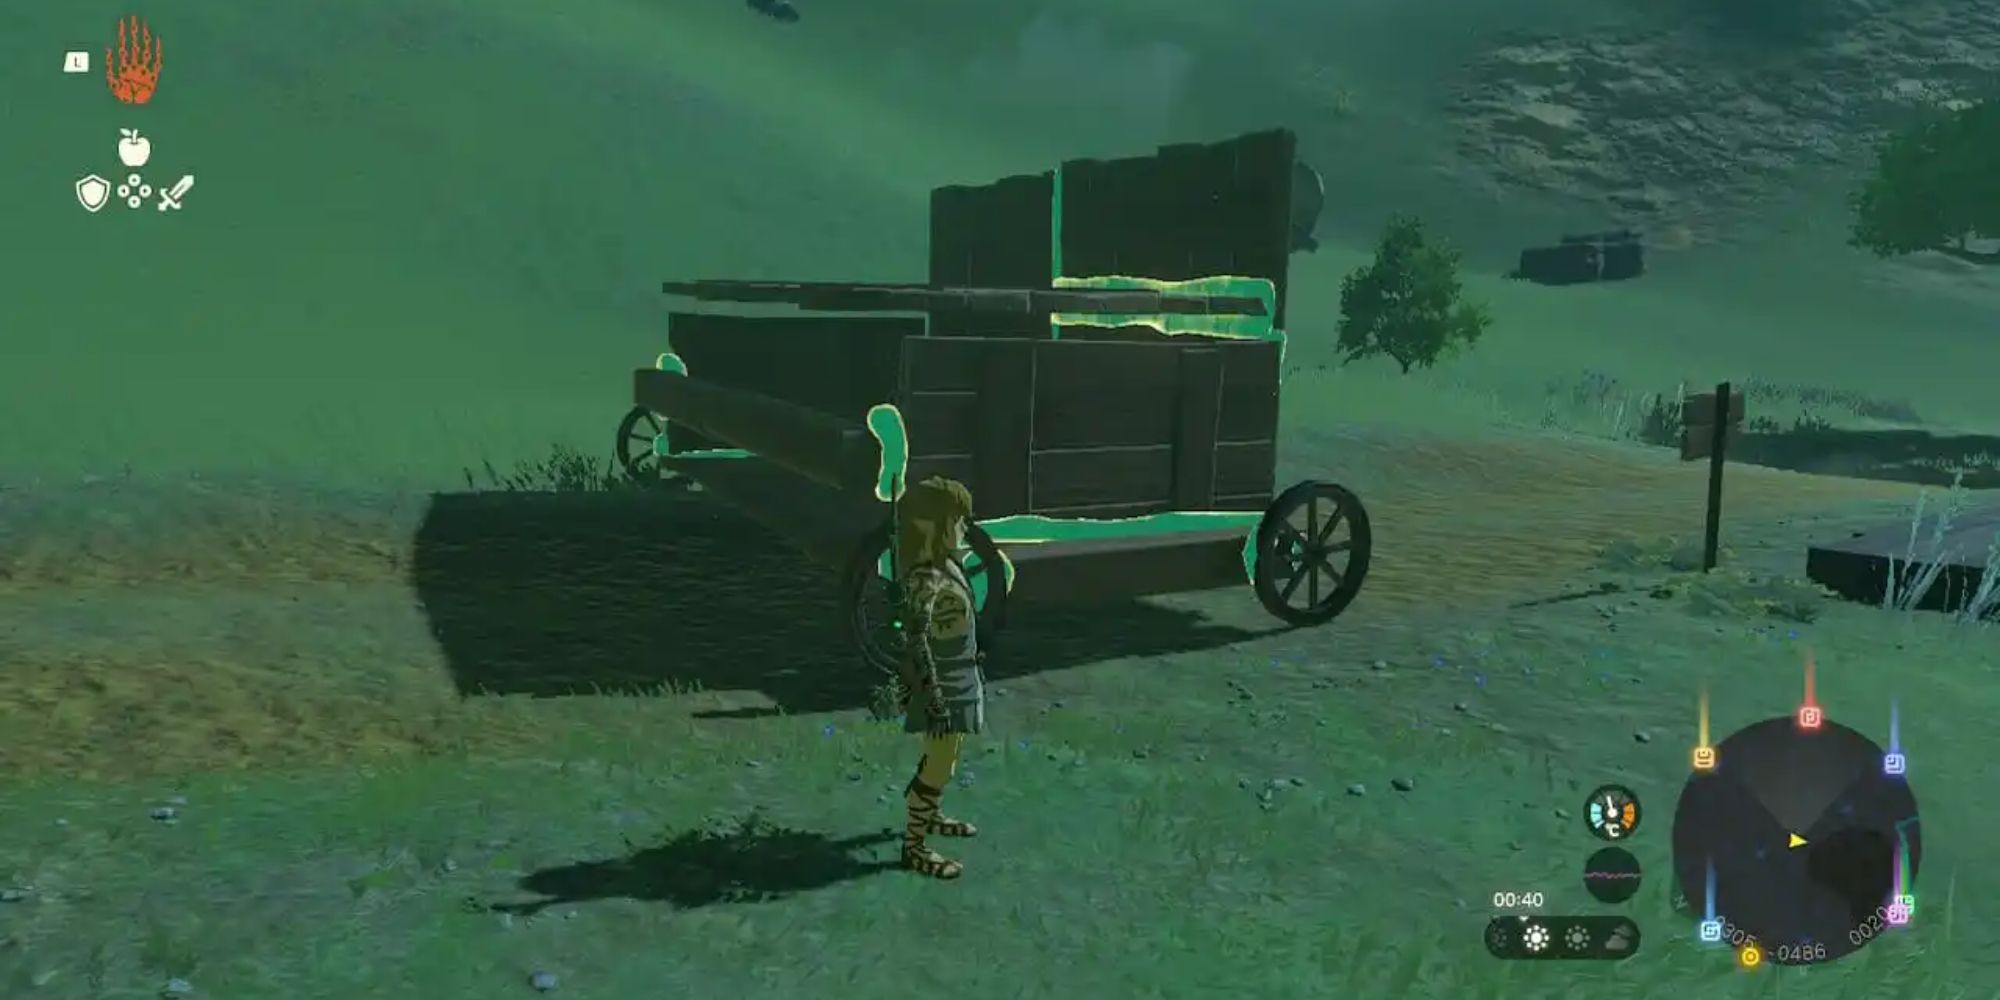 A cart made out of wooden planks in Hyrule